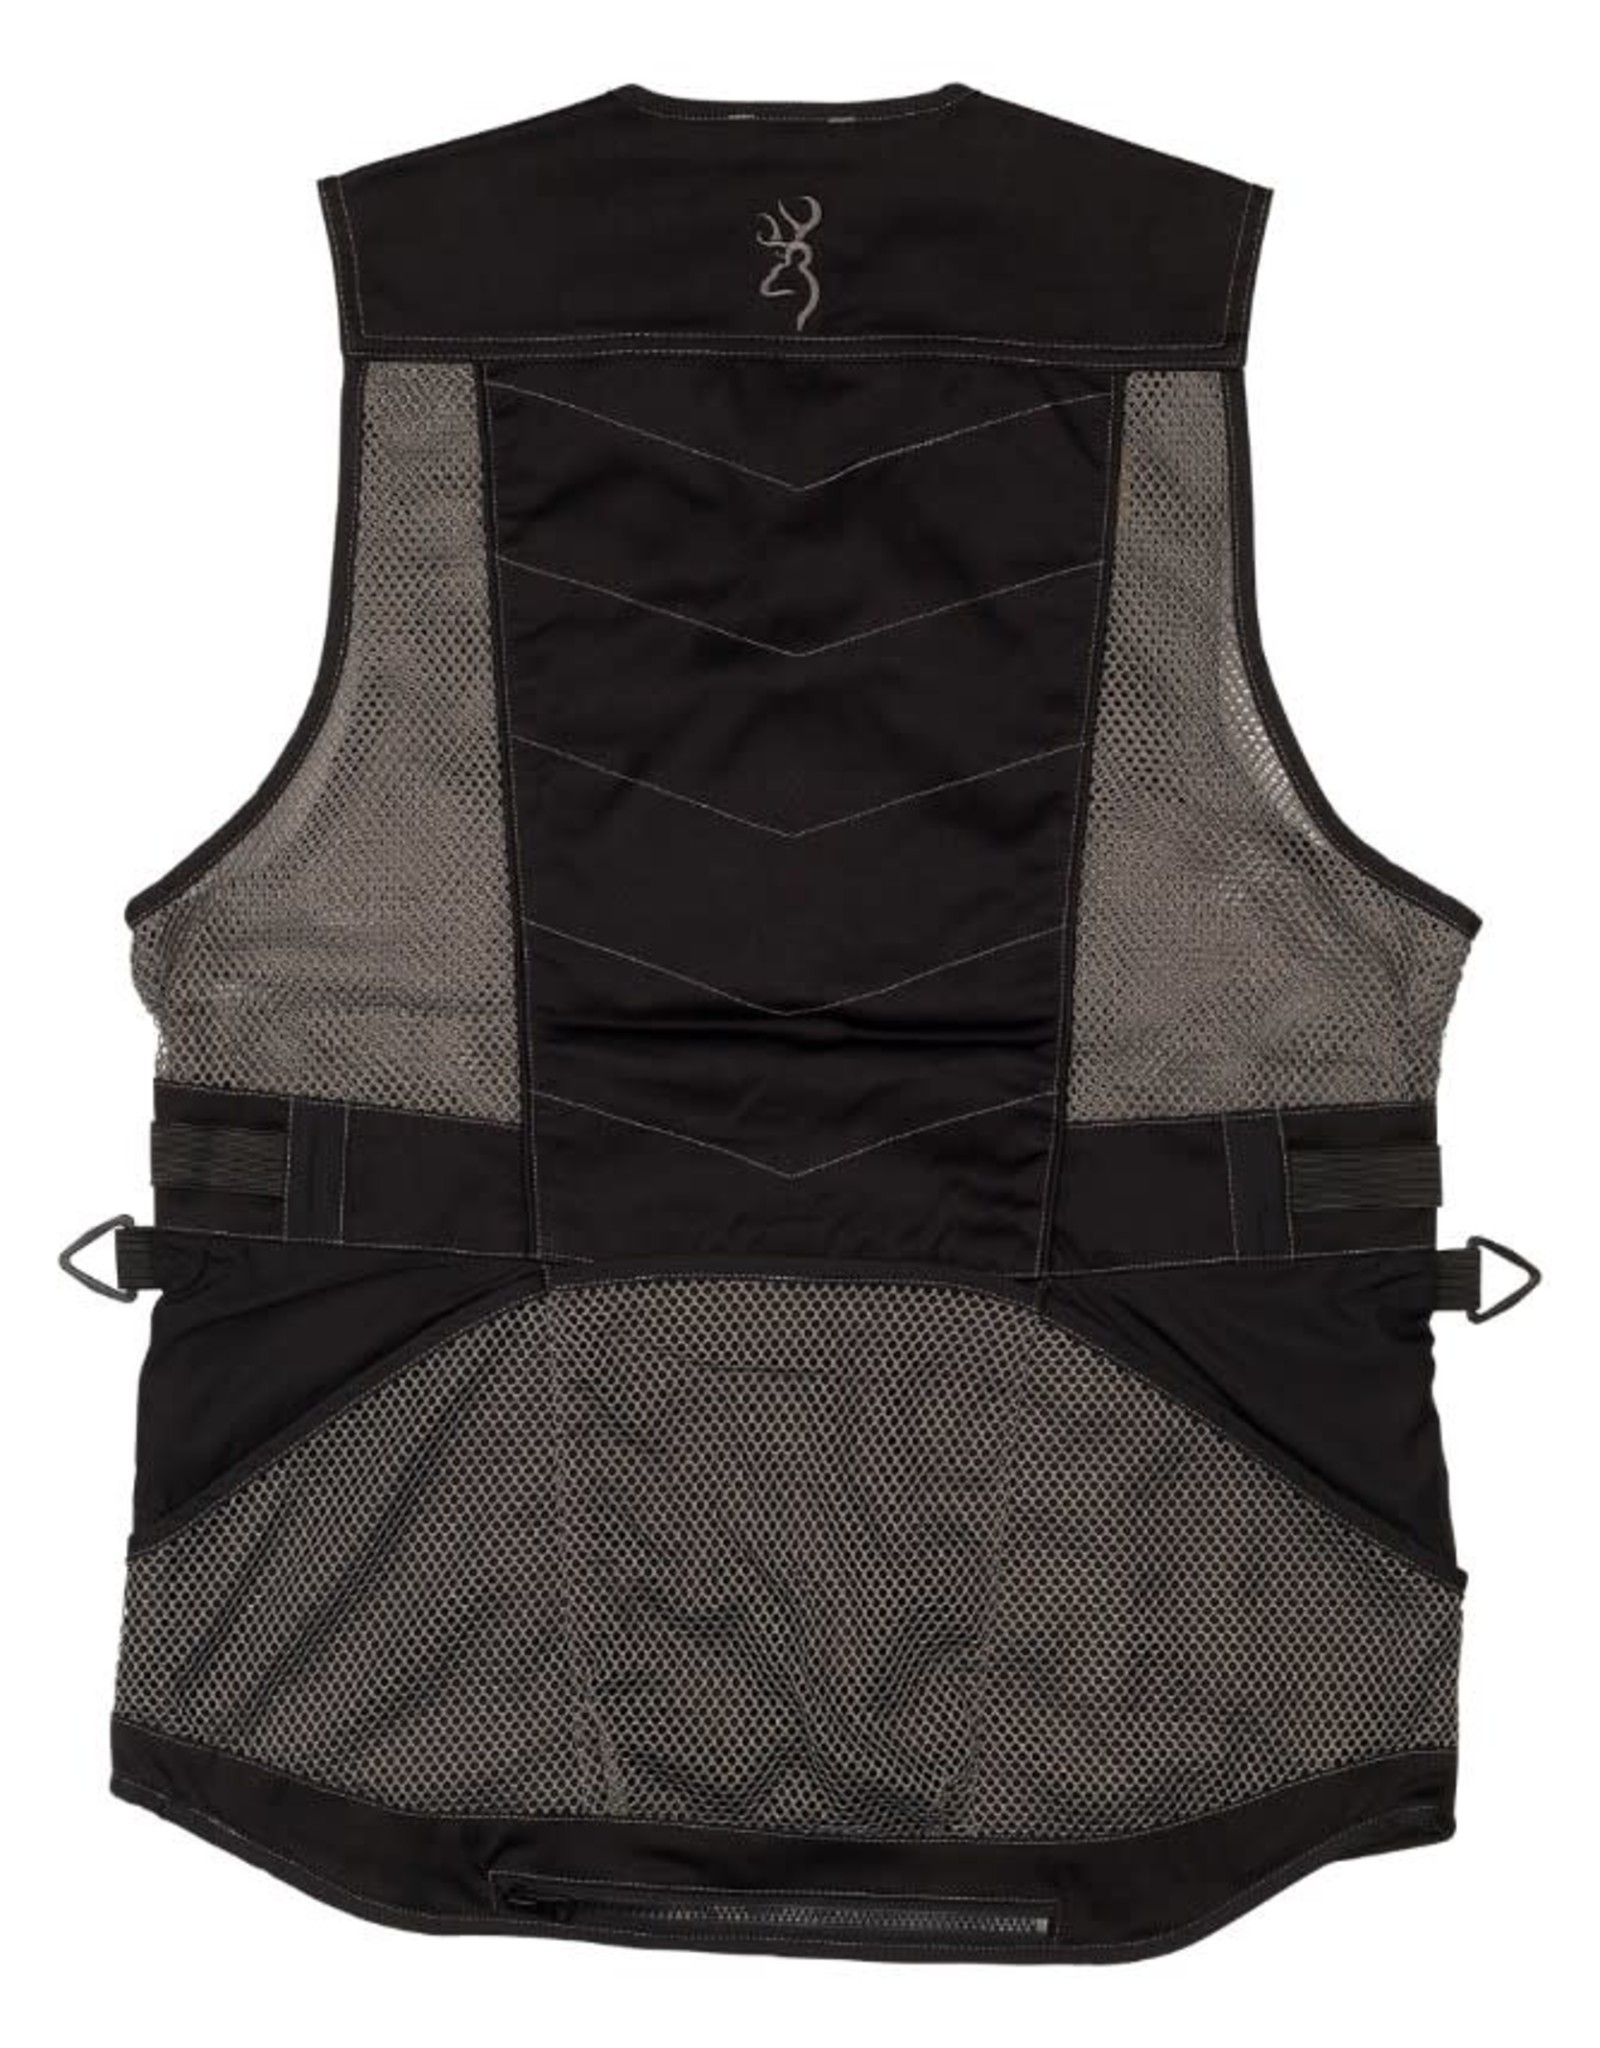 Browning Ace Shooting Vest for Her - Blk/Blk - XL